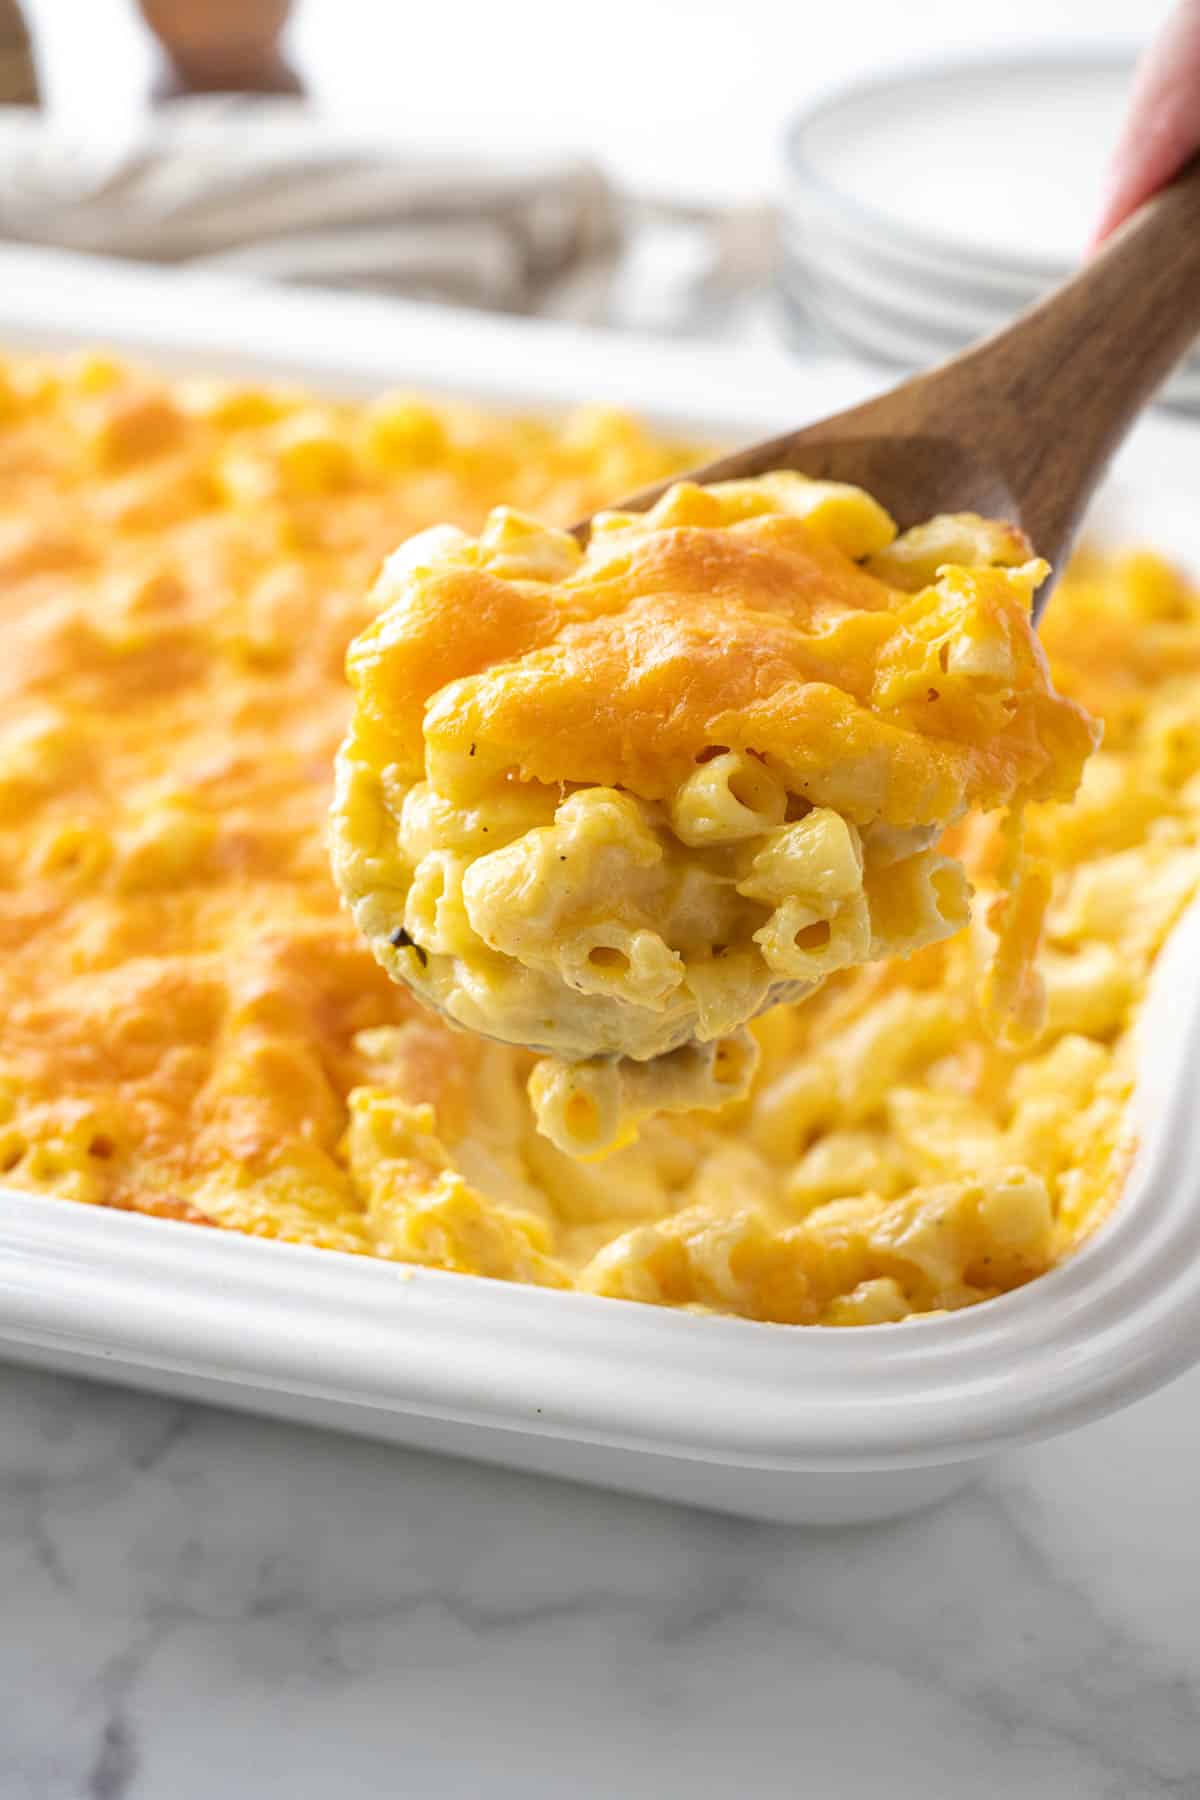 Removing a scoop of macaroni and cheese from a casserole dish.